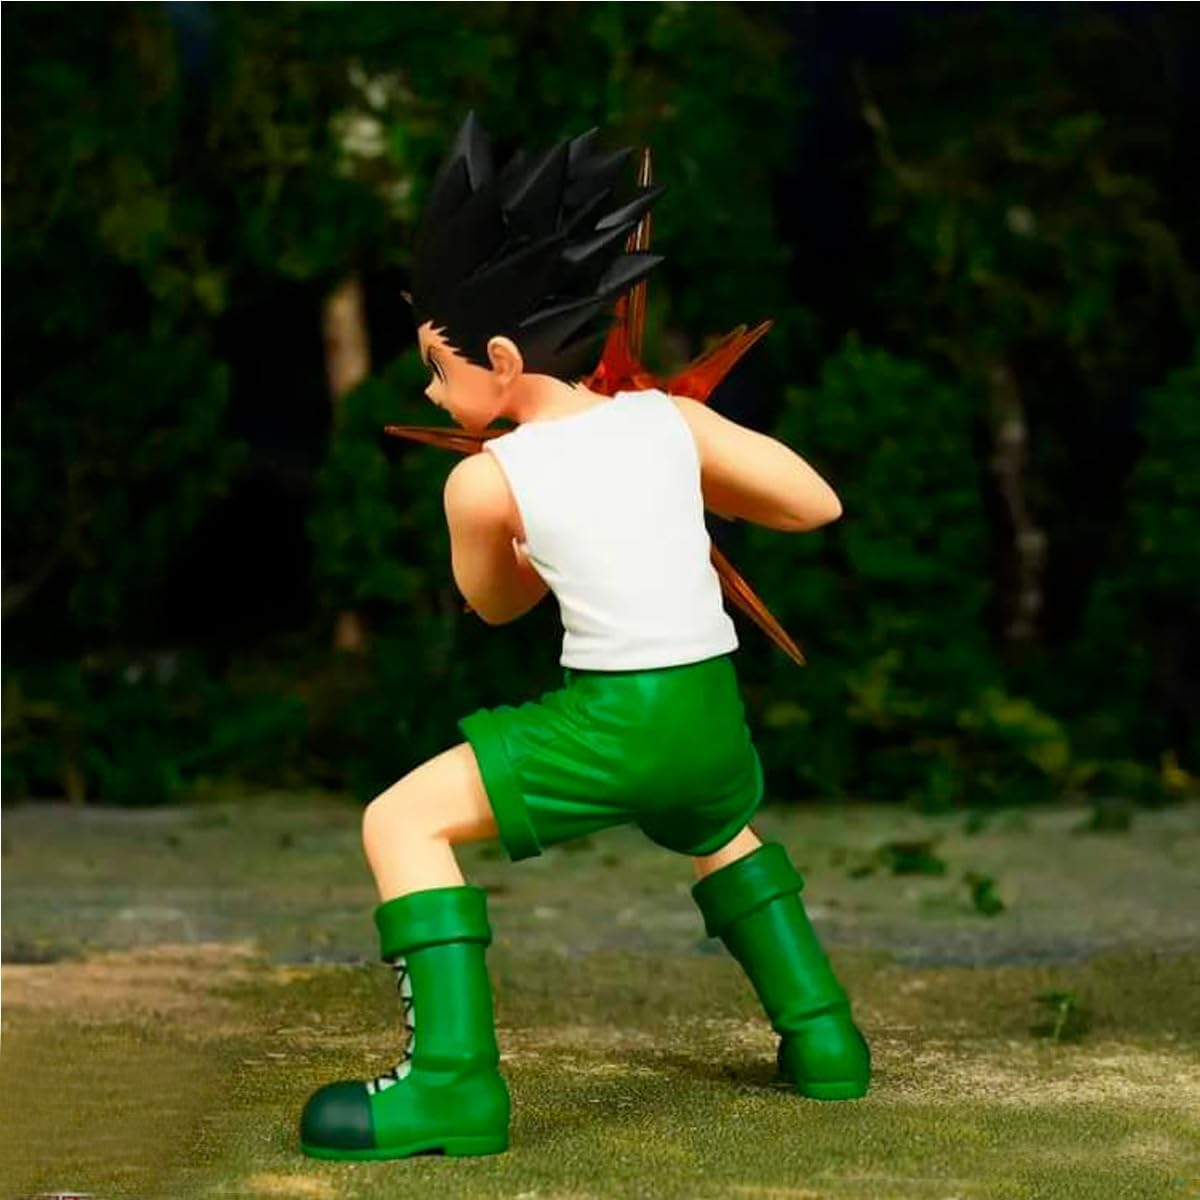 Hunter x Hunter Attack Pose Gon Figure Anime Collectible 4.3" in